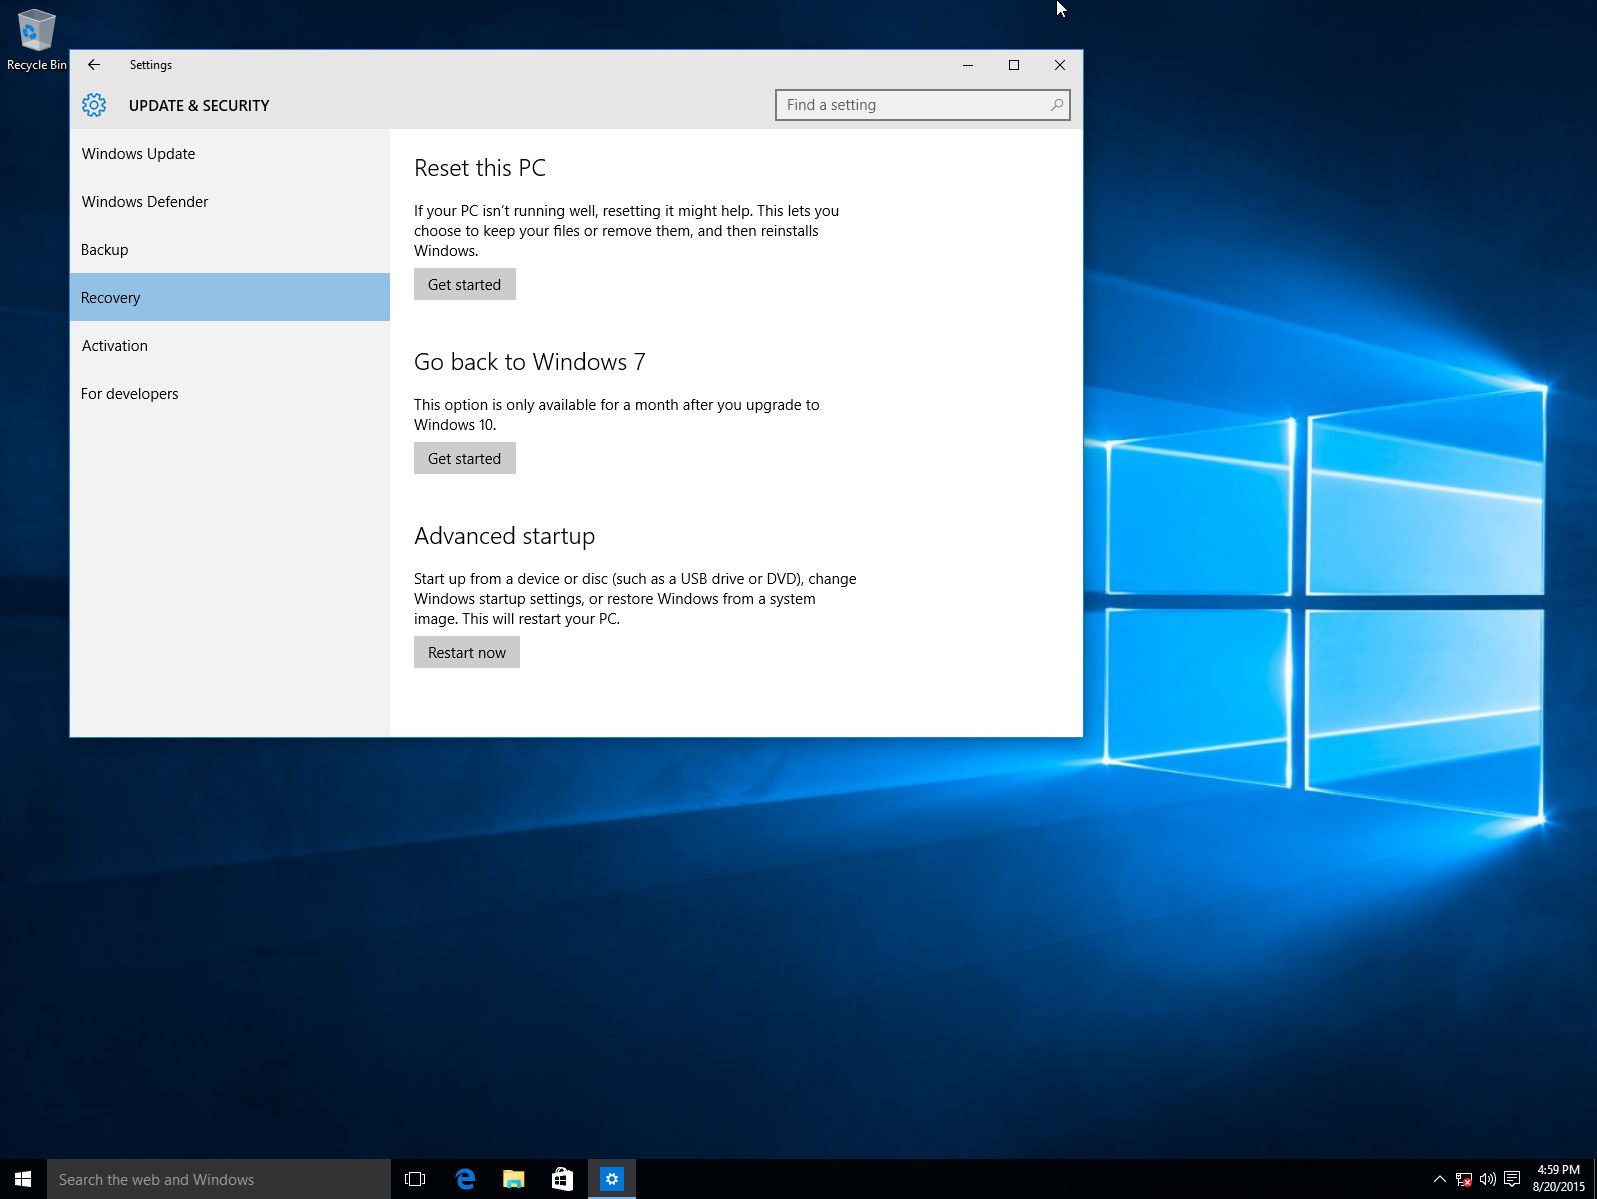 How to update windows 7 to windows 10